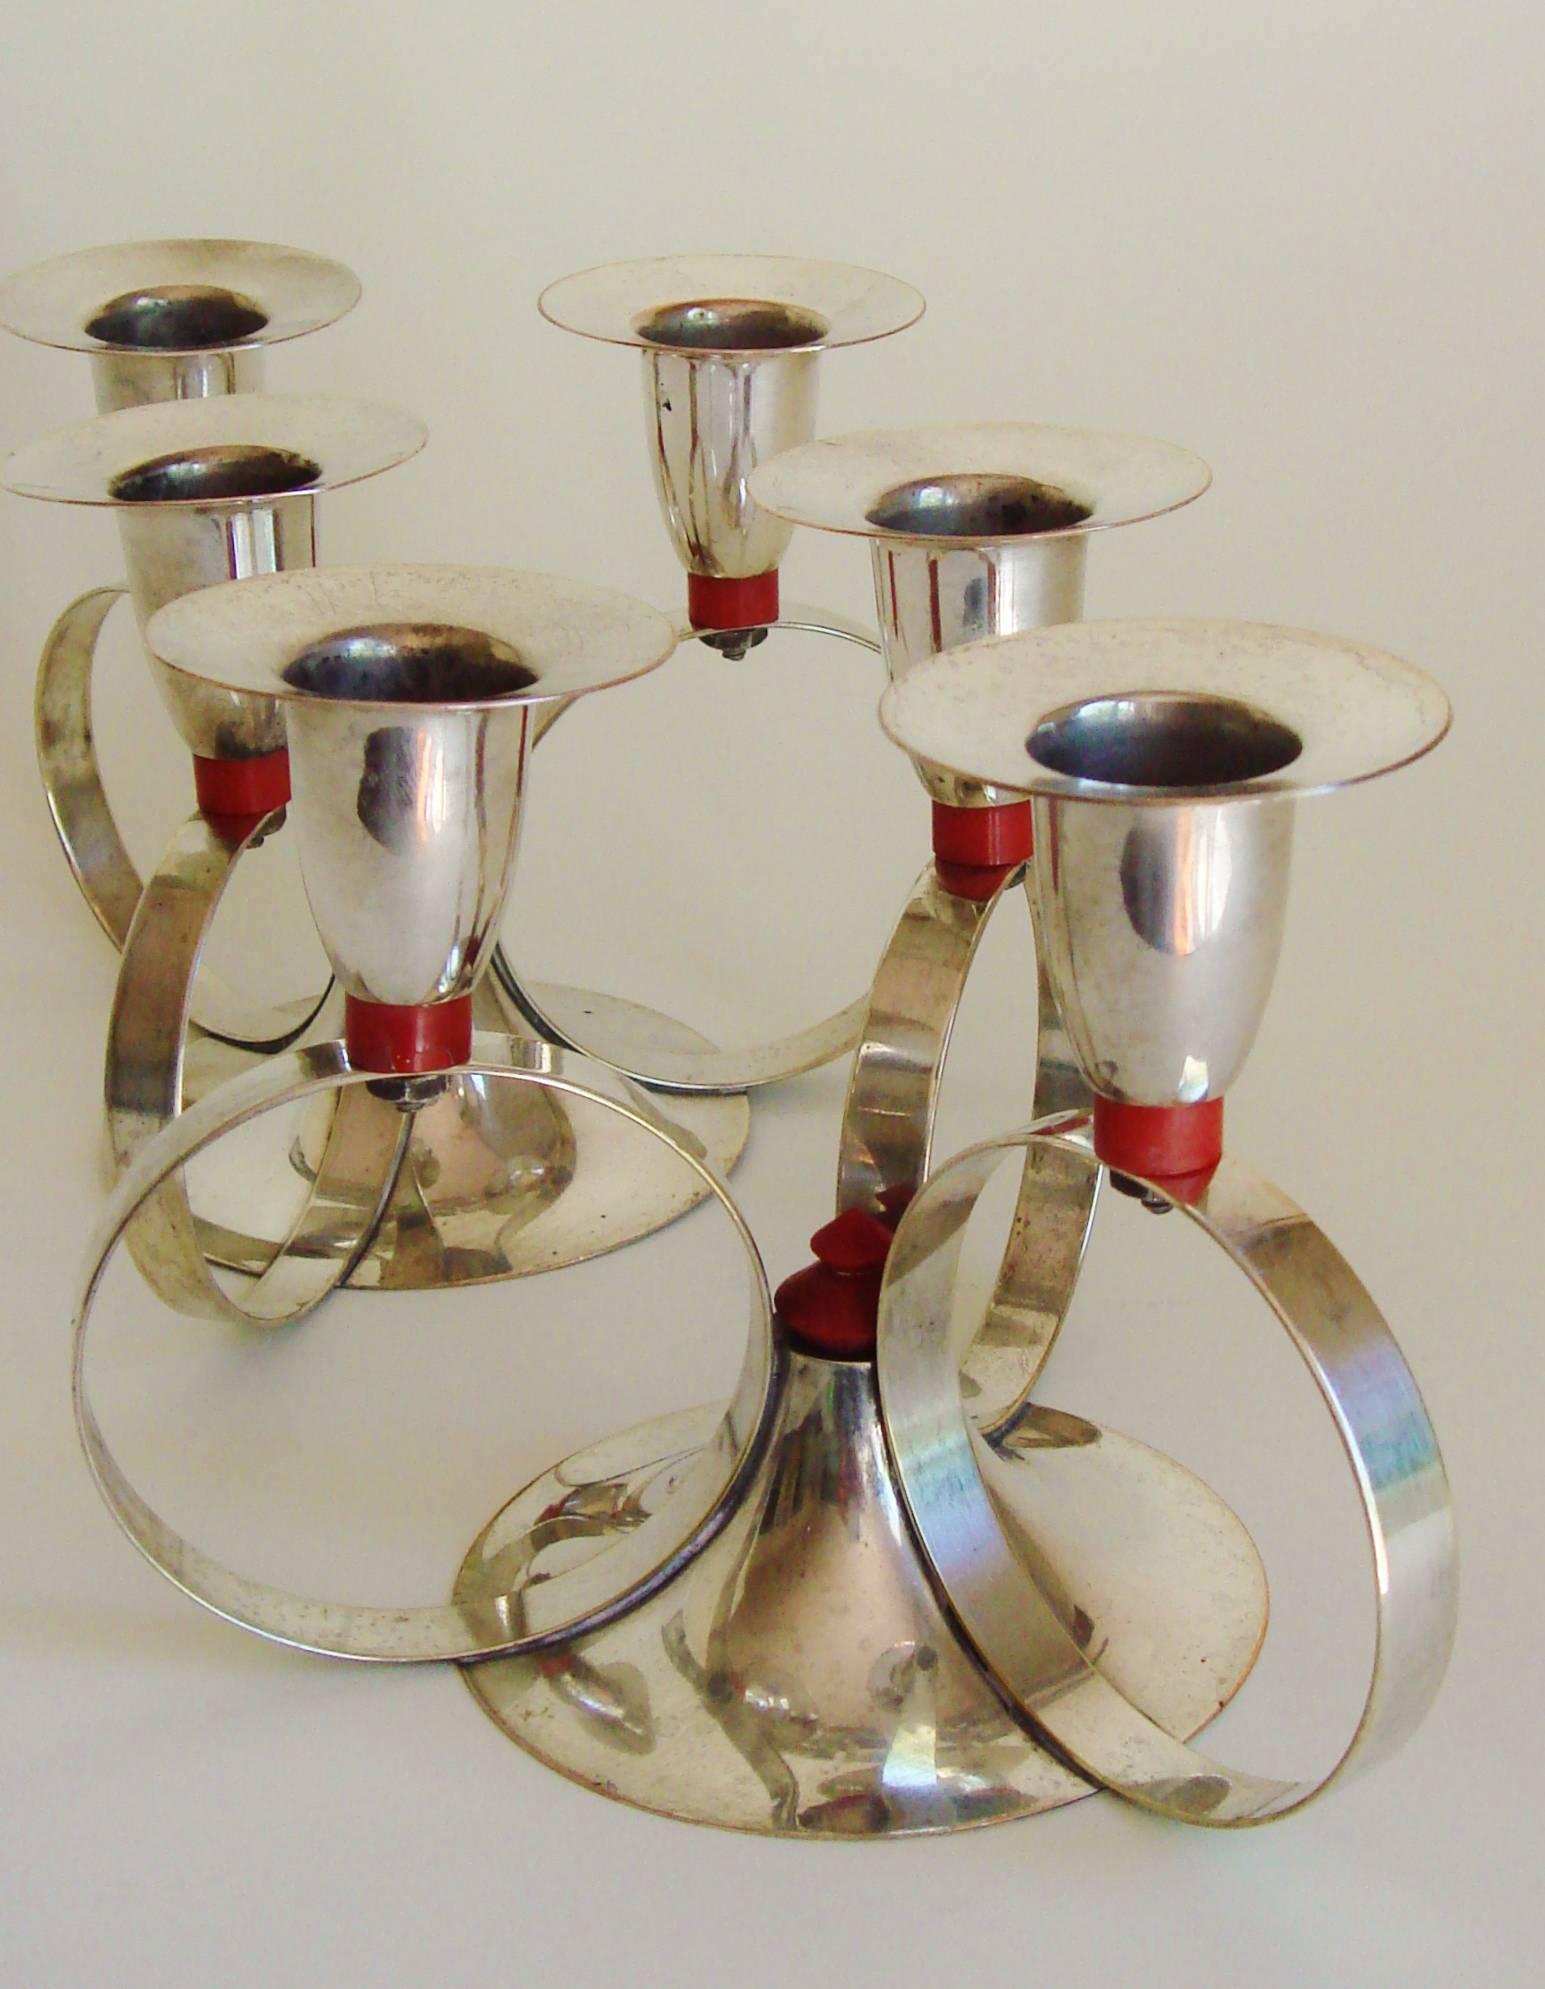 Mid-20th Century Pair of American Art Deco Silver Plated Candleholders with Red Bakelite Accents For Sale